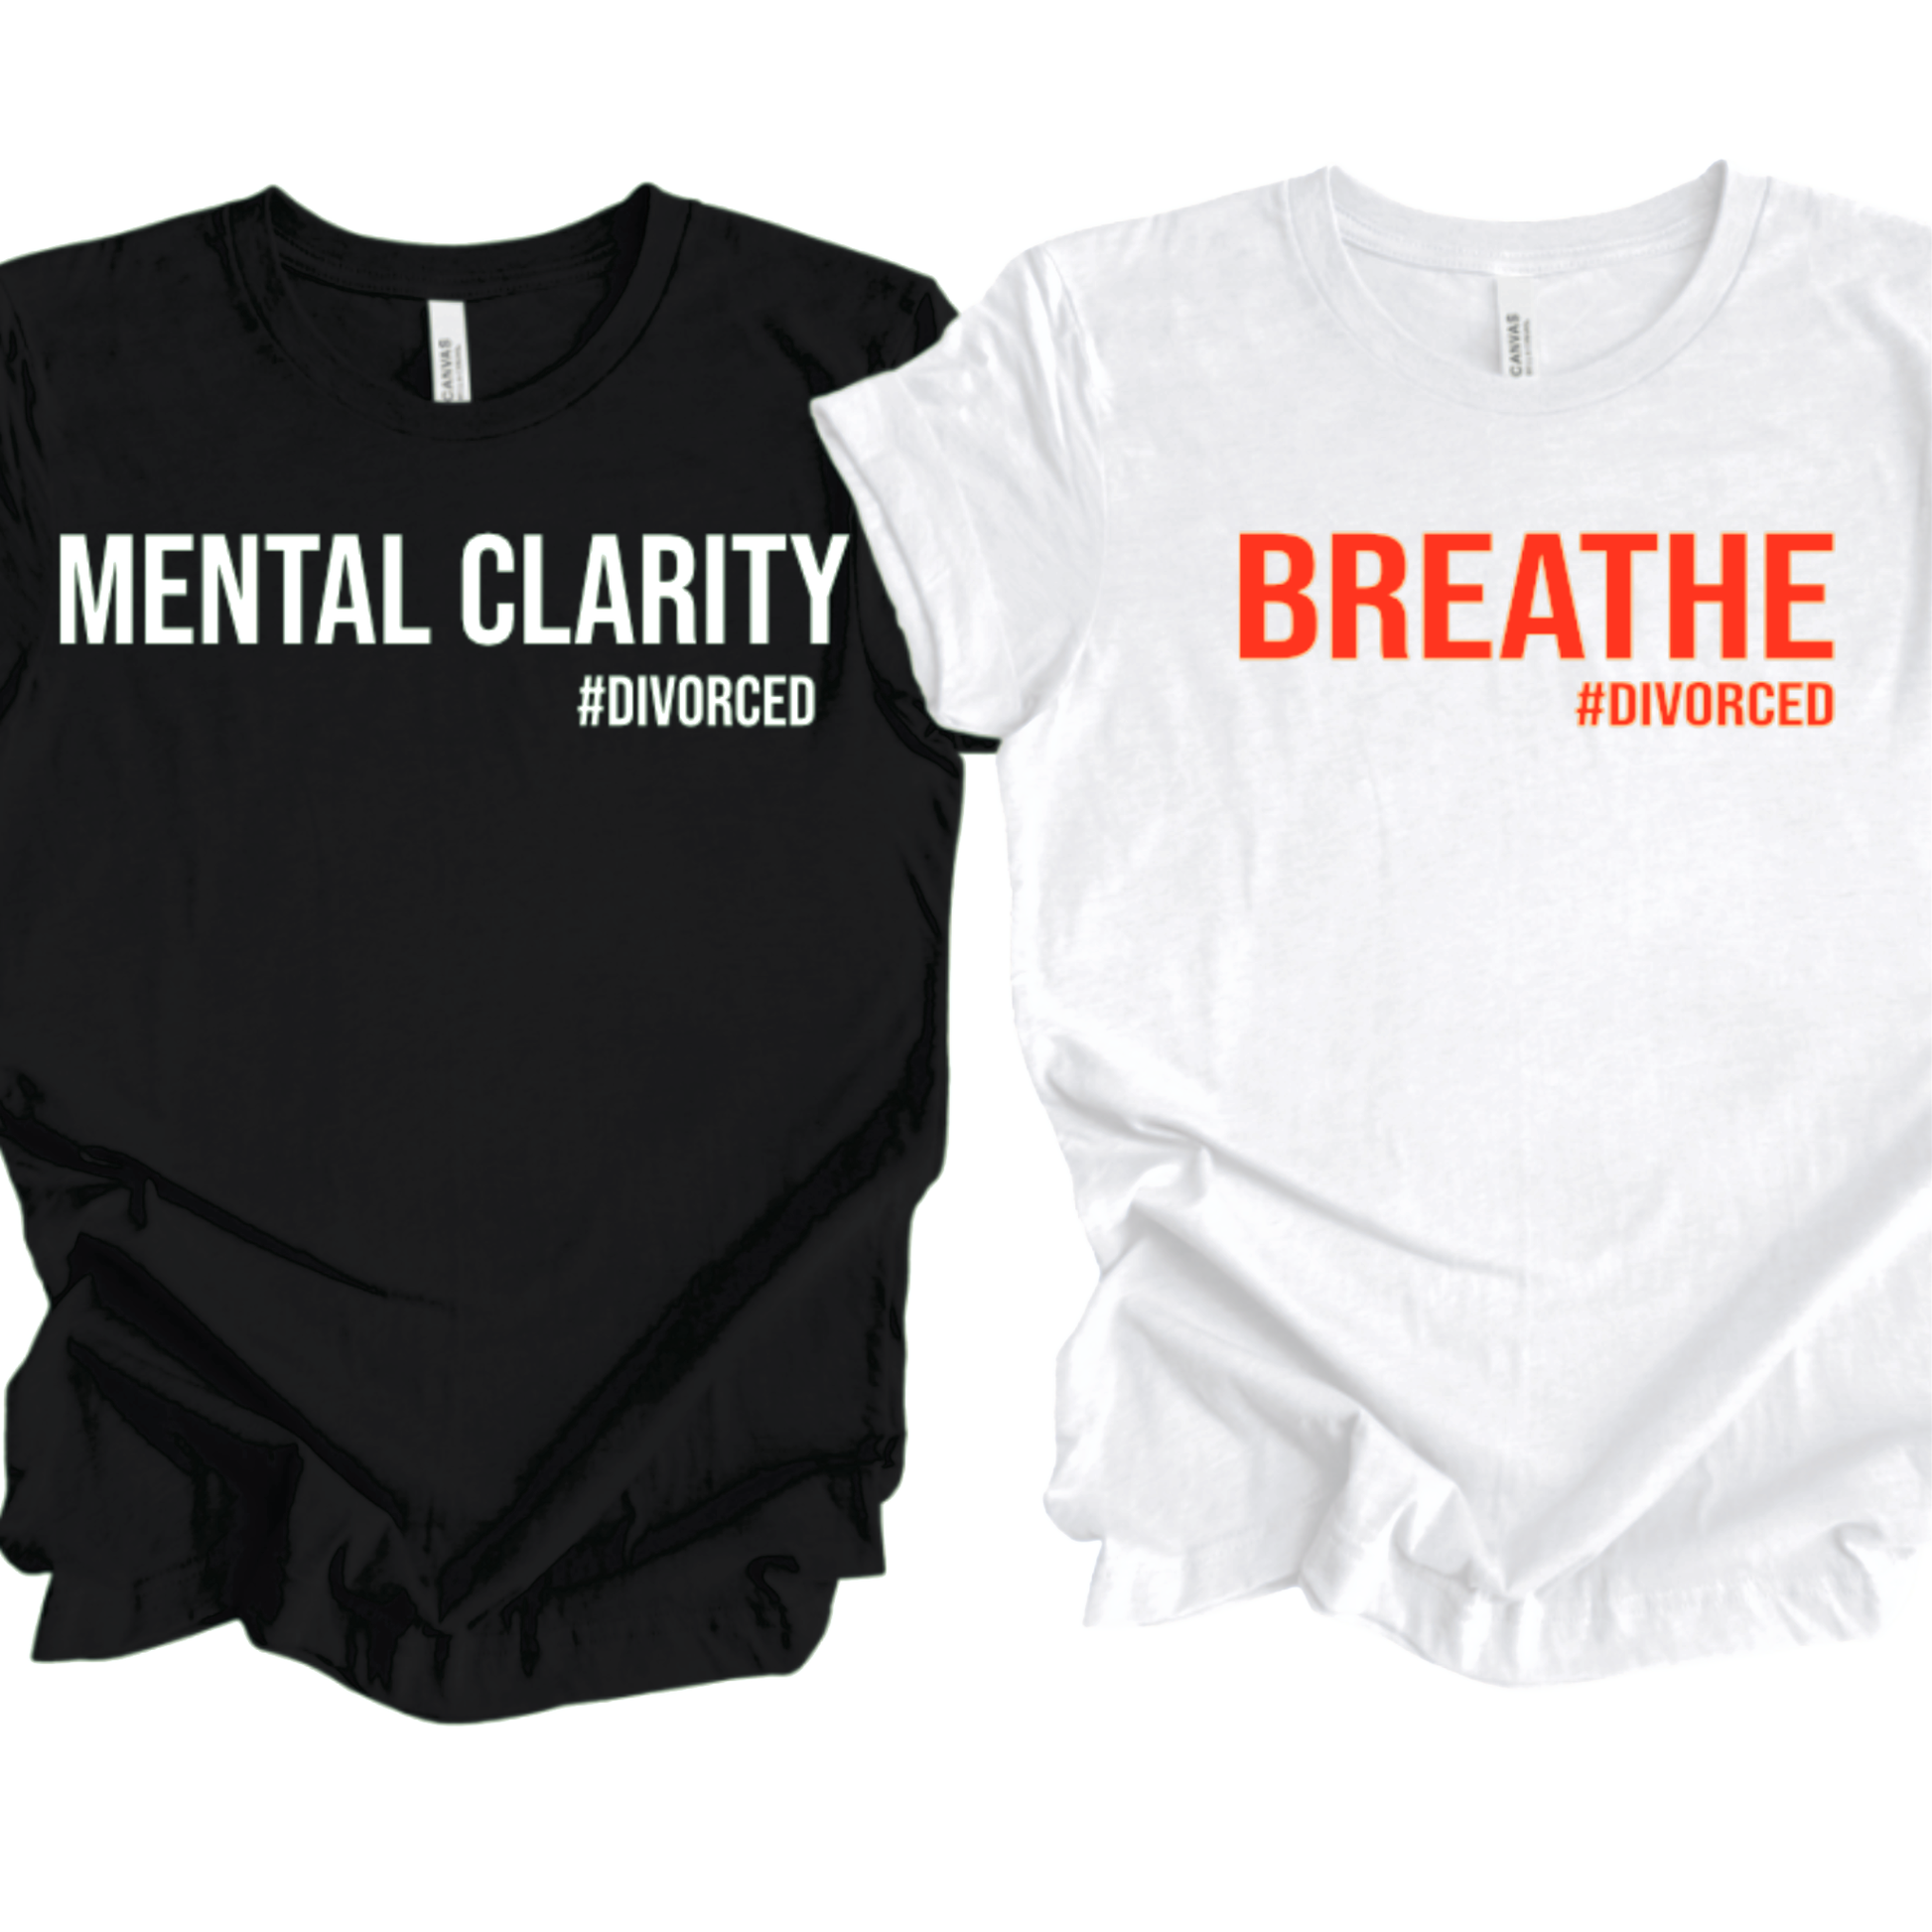 One black shirt with the words "mental clarity hashtag divorced" in white on it, and one white shirt with "breathe hashtag divorced" in red on it